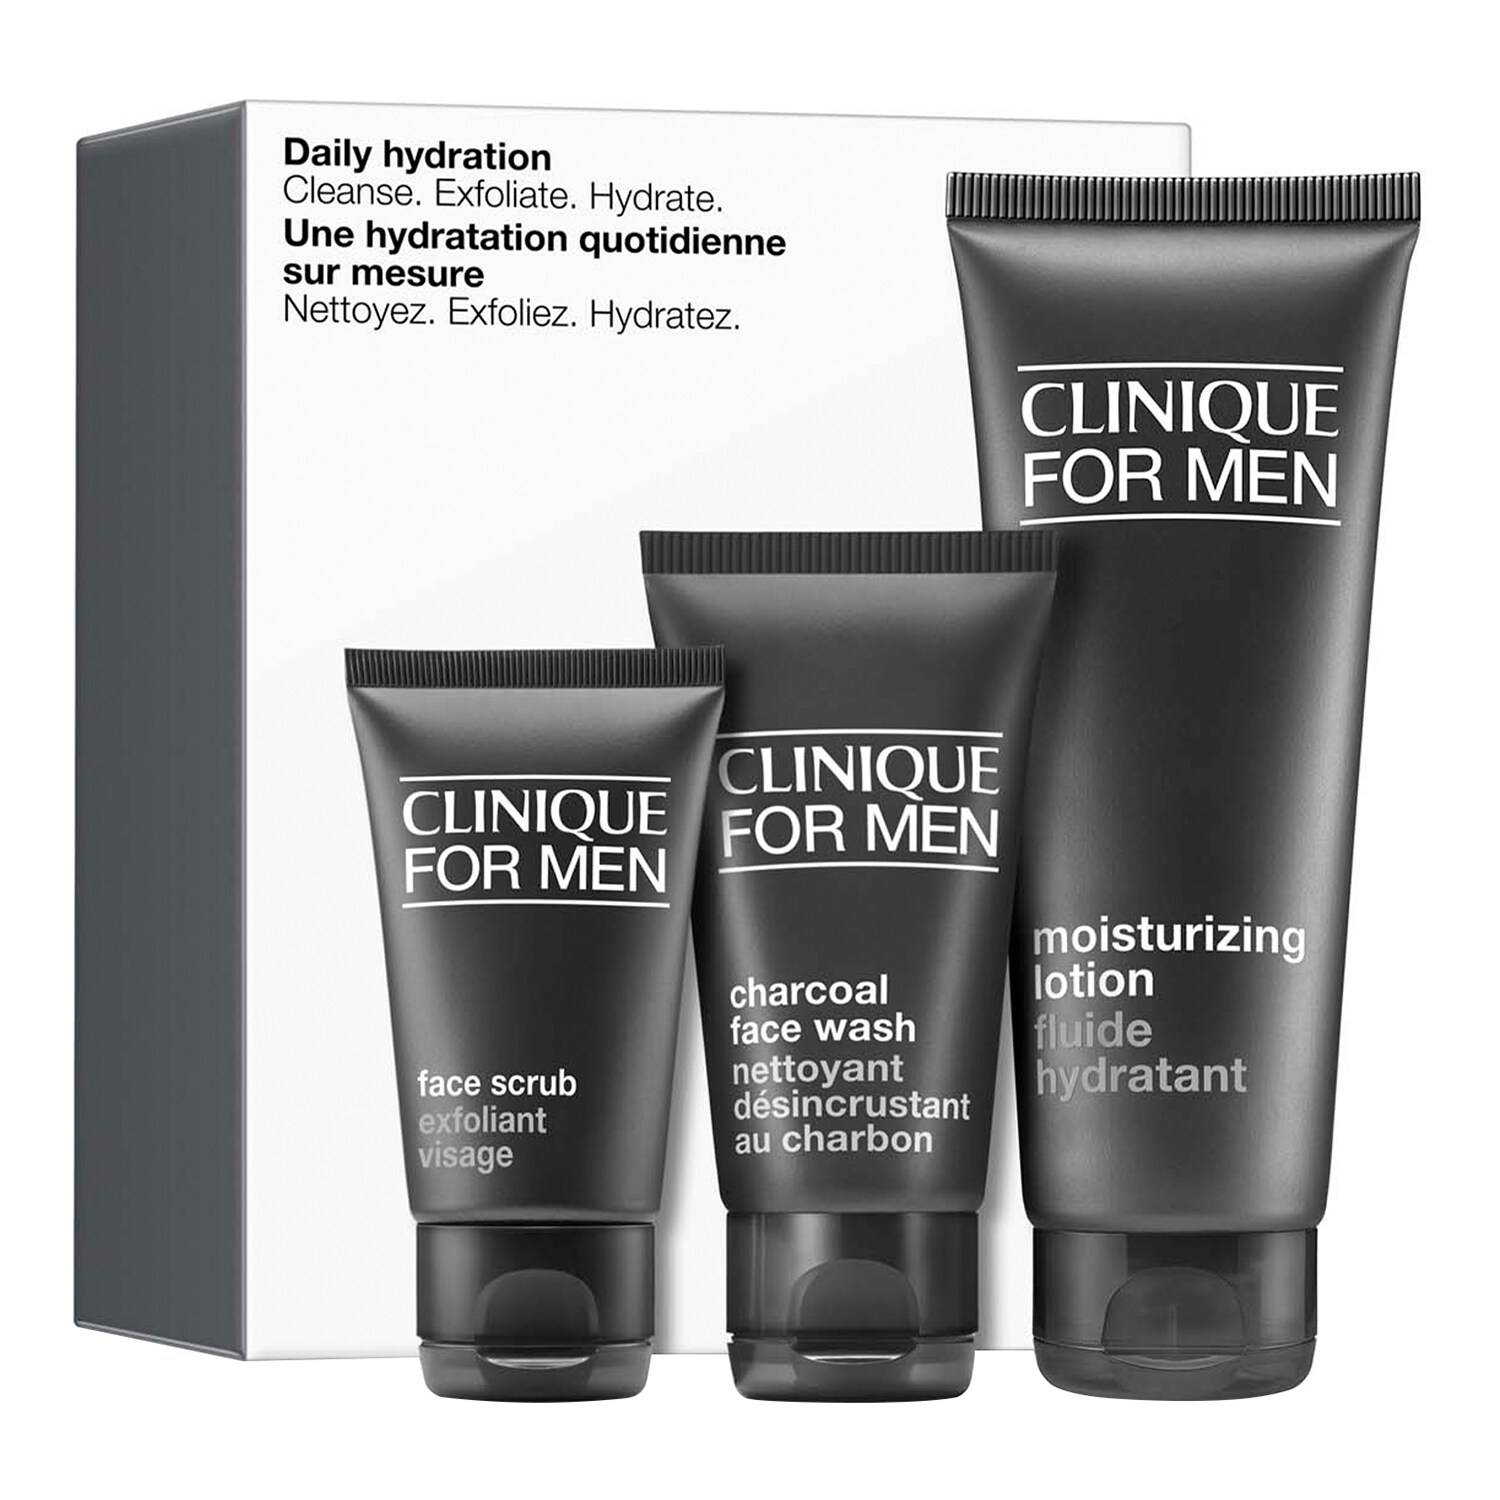 Clinique For Men Daily Hydration Skincare Gift Set